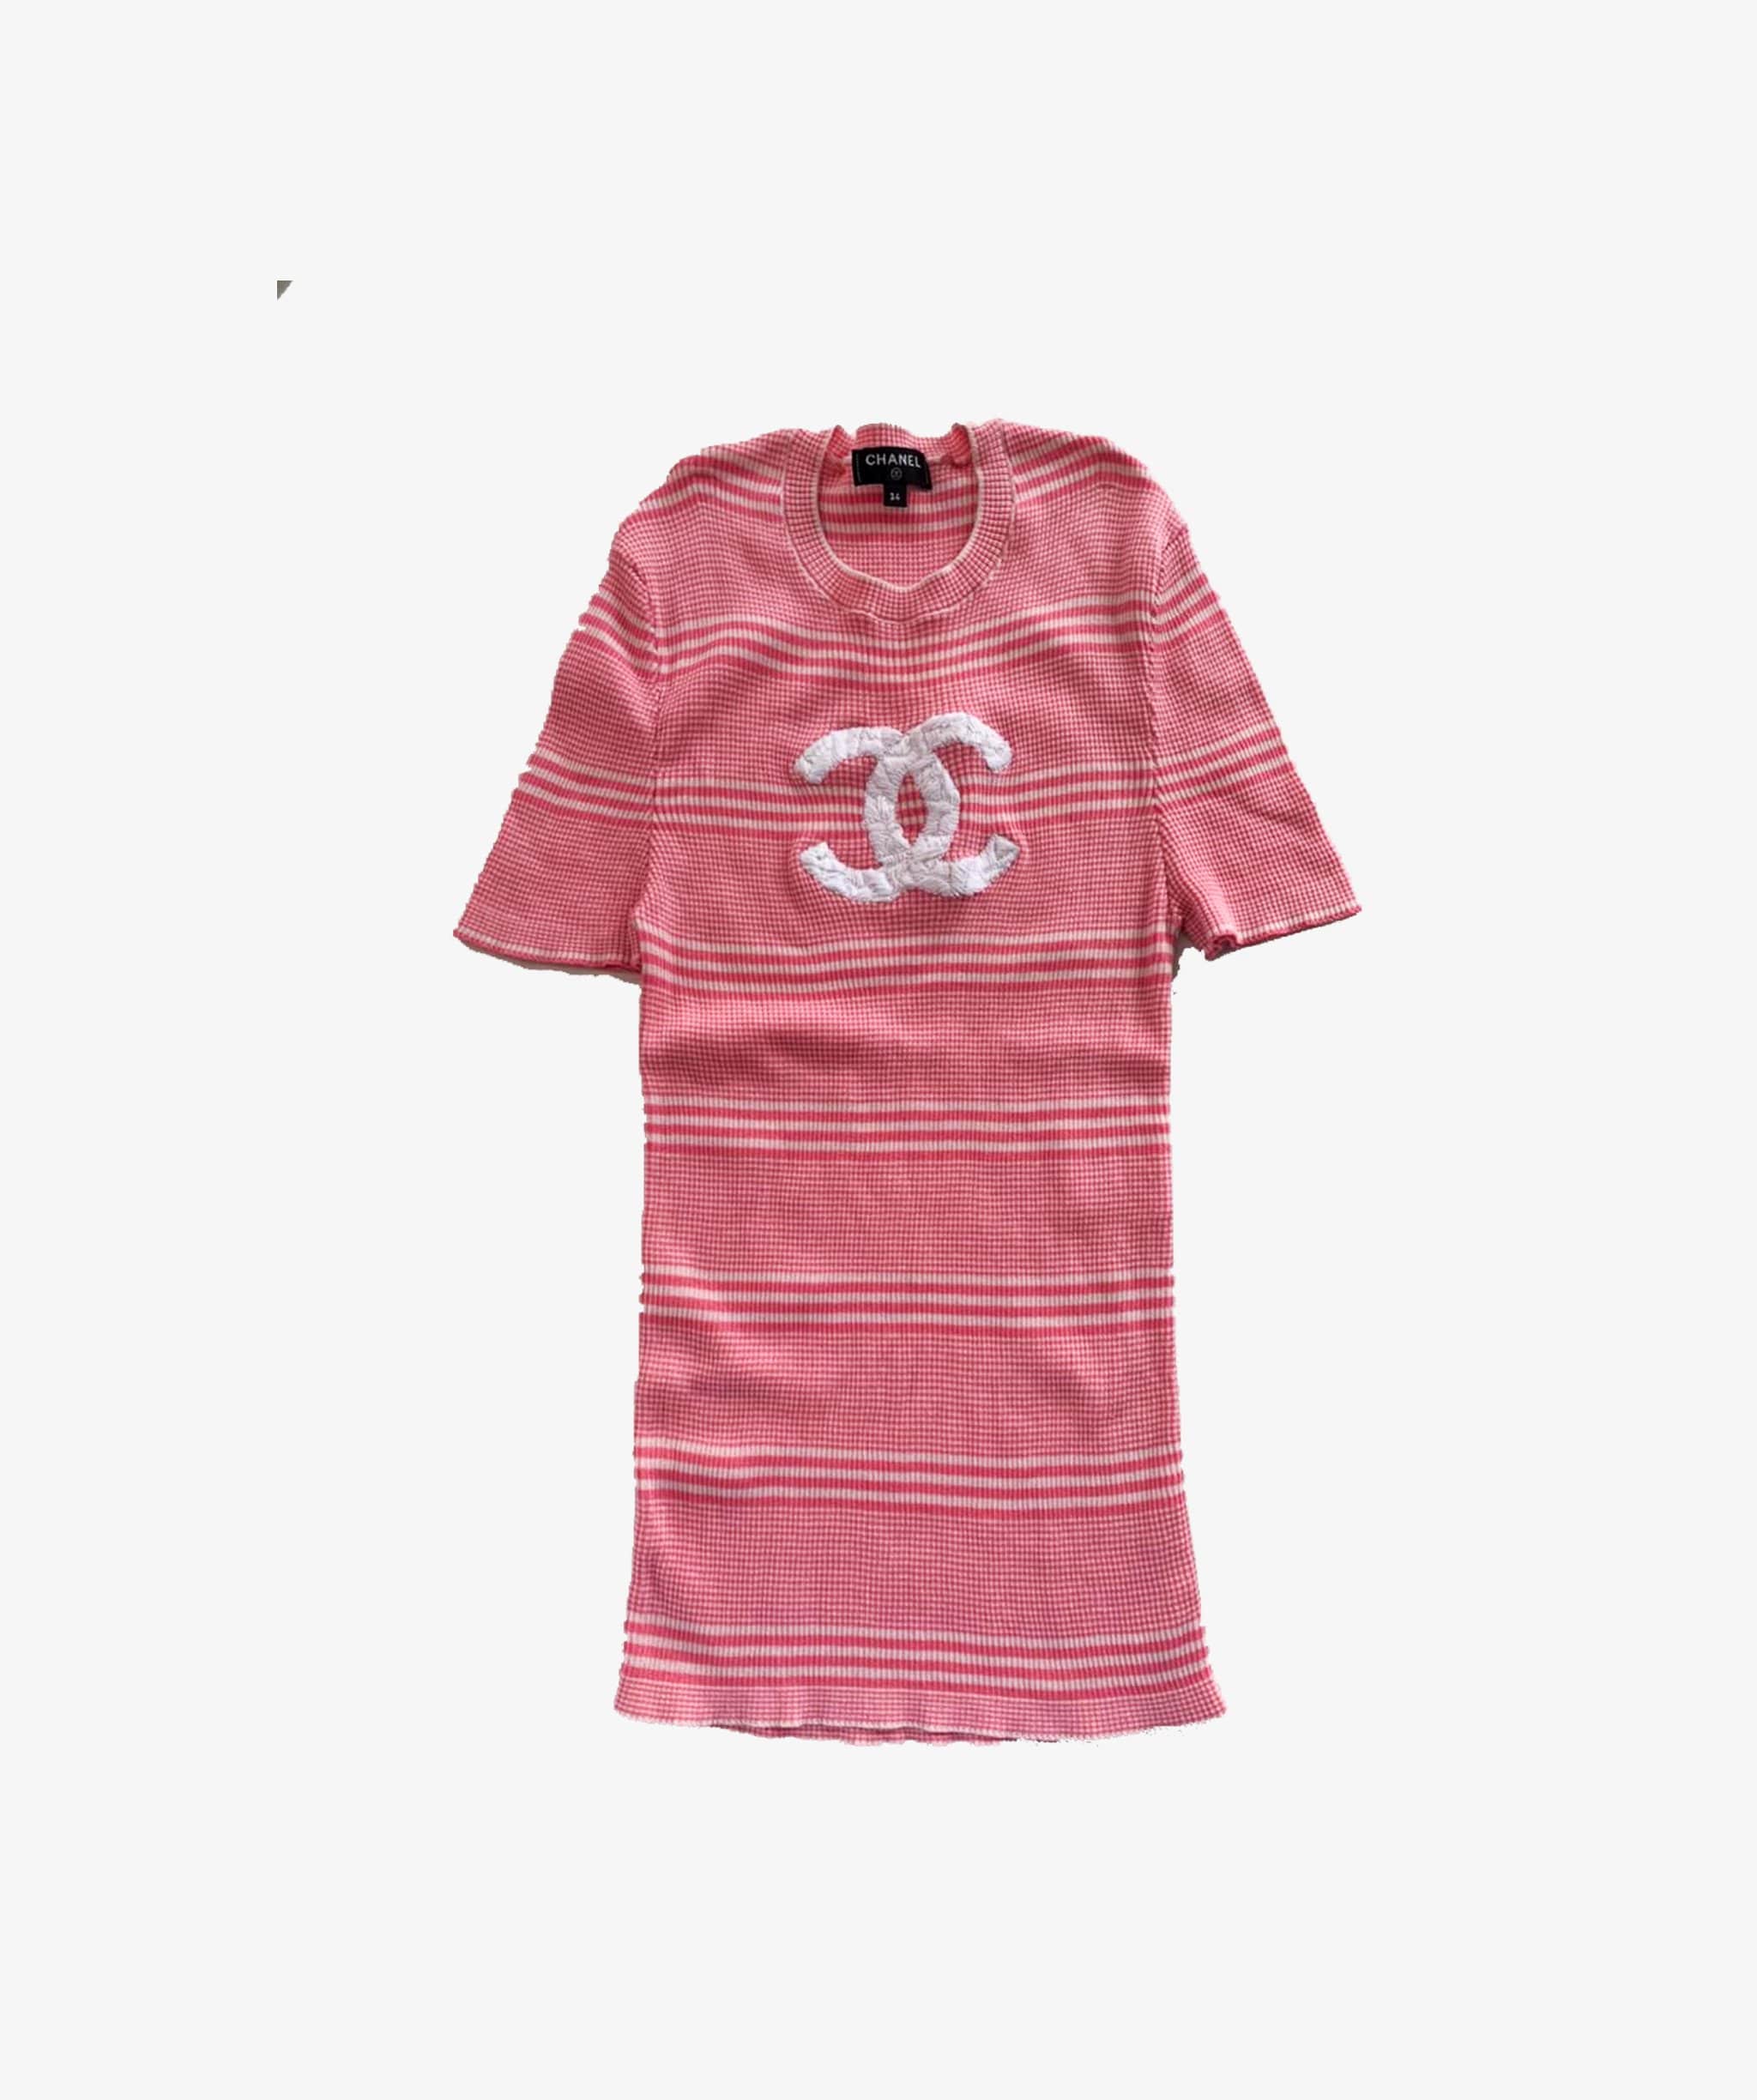 Chanel CC Knit Pink Top